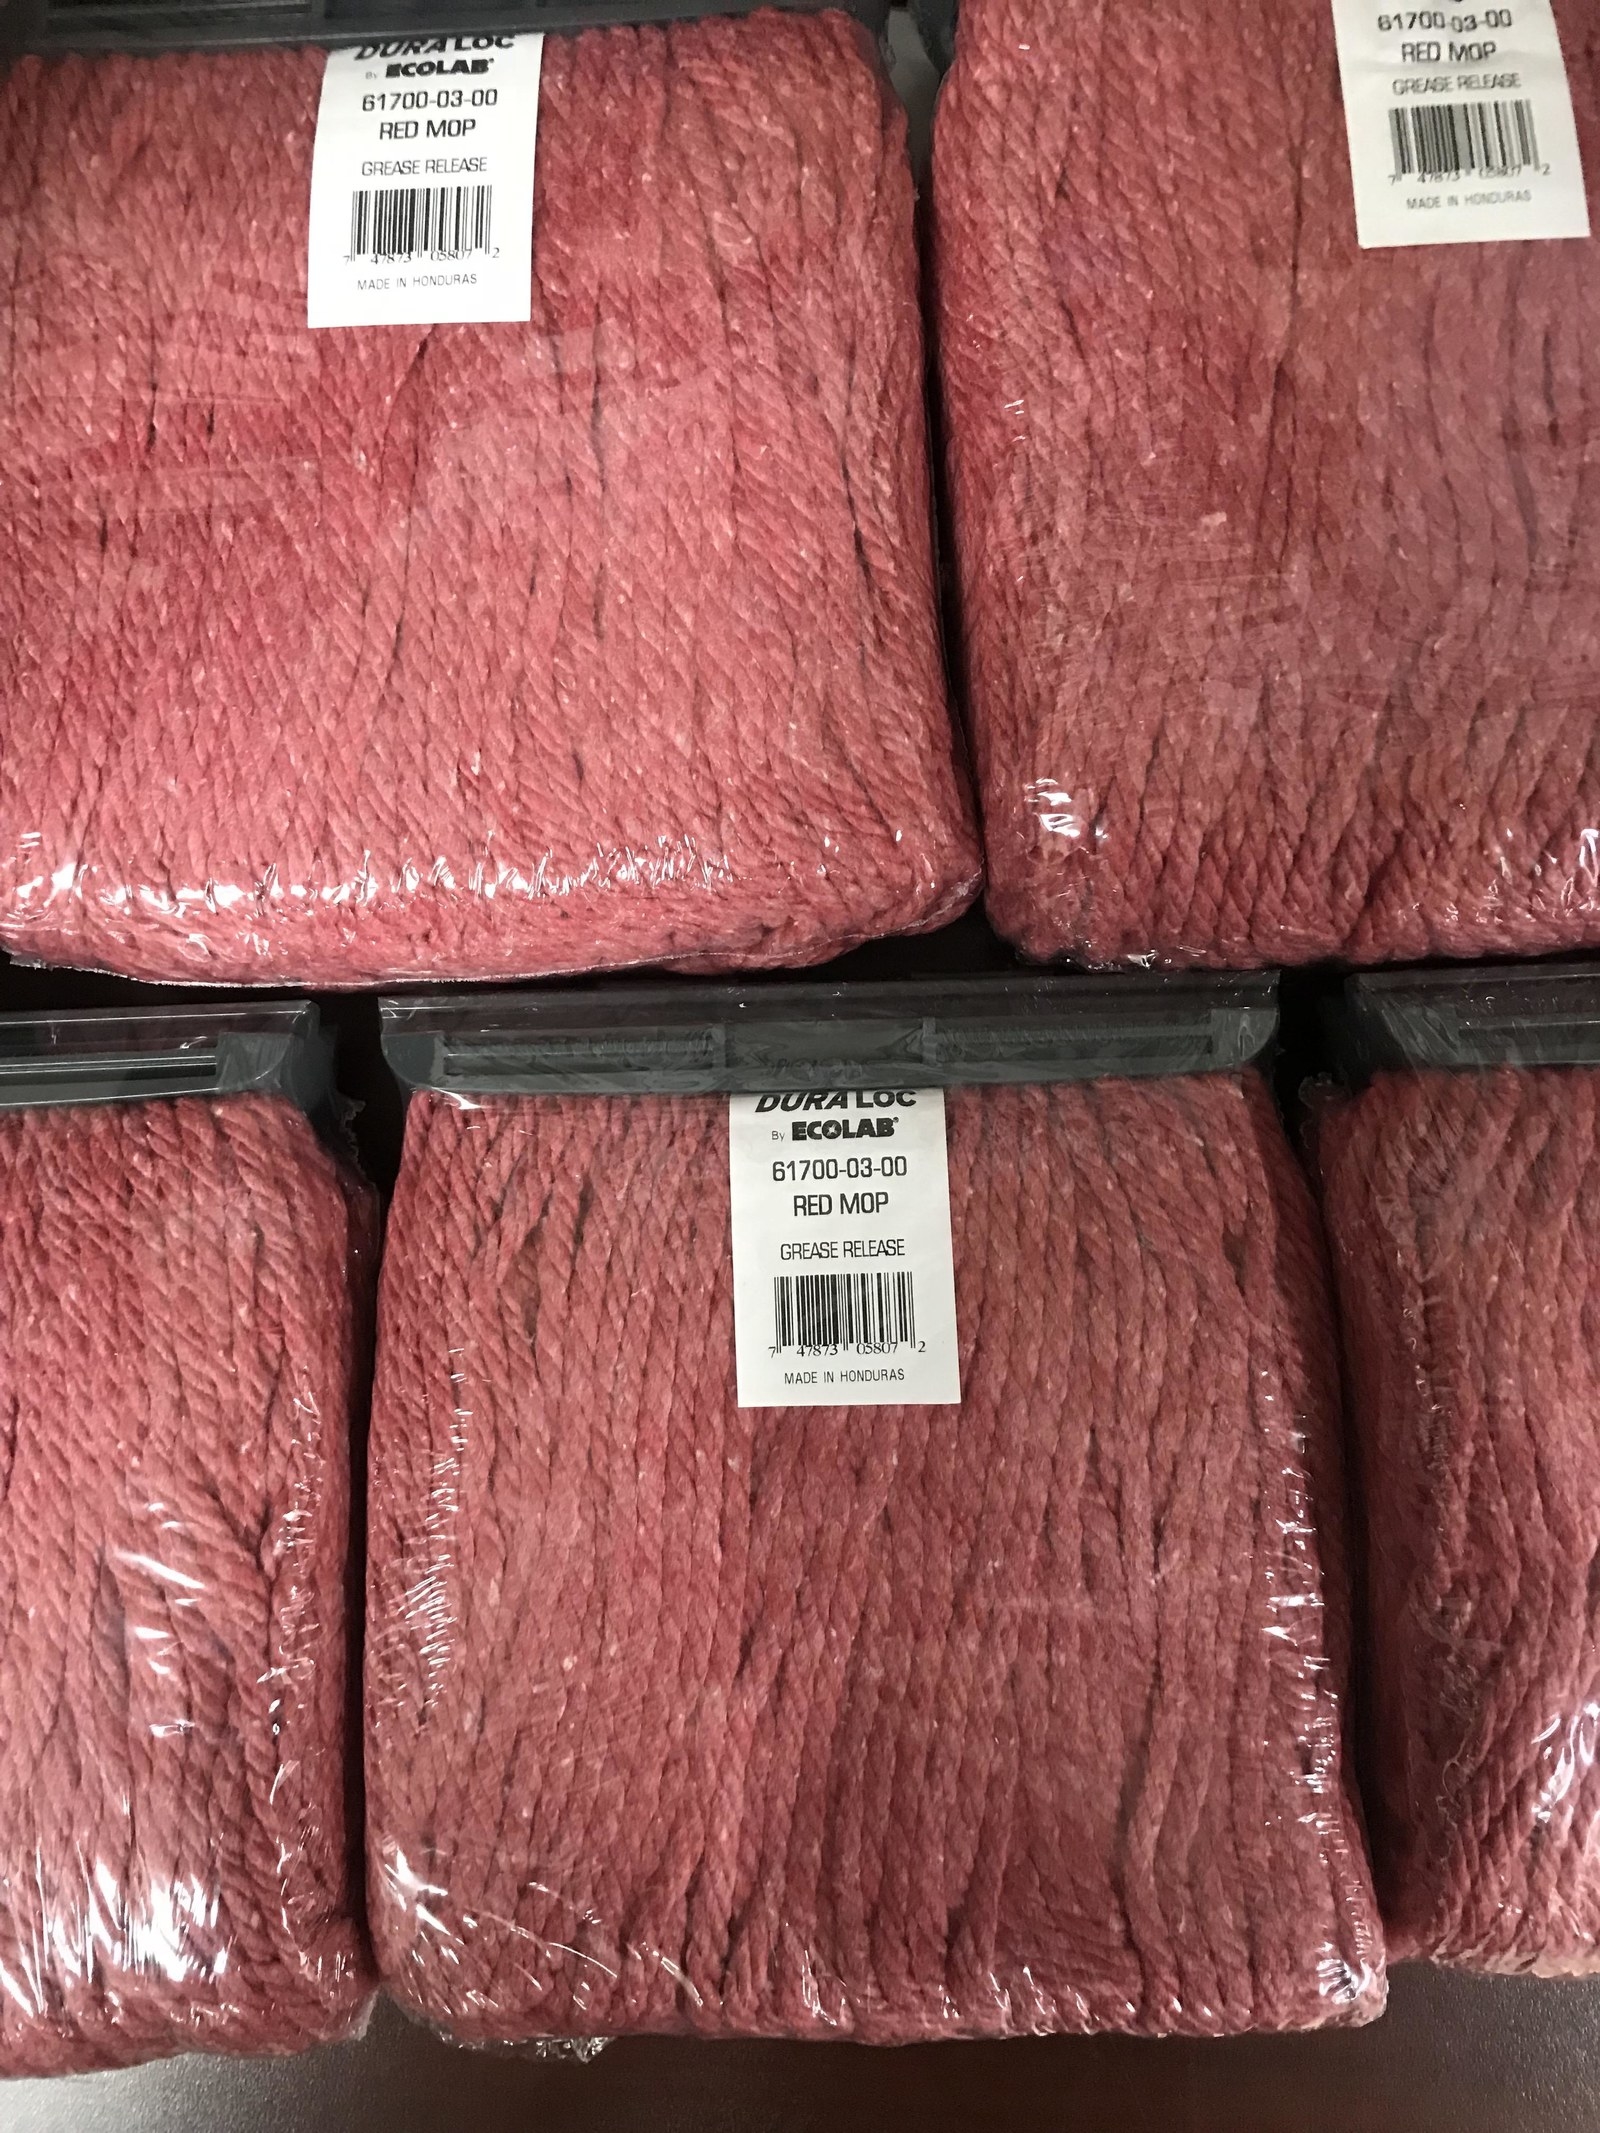 mops that look like raw ground meat